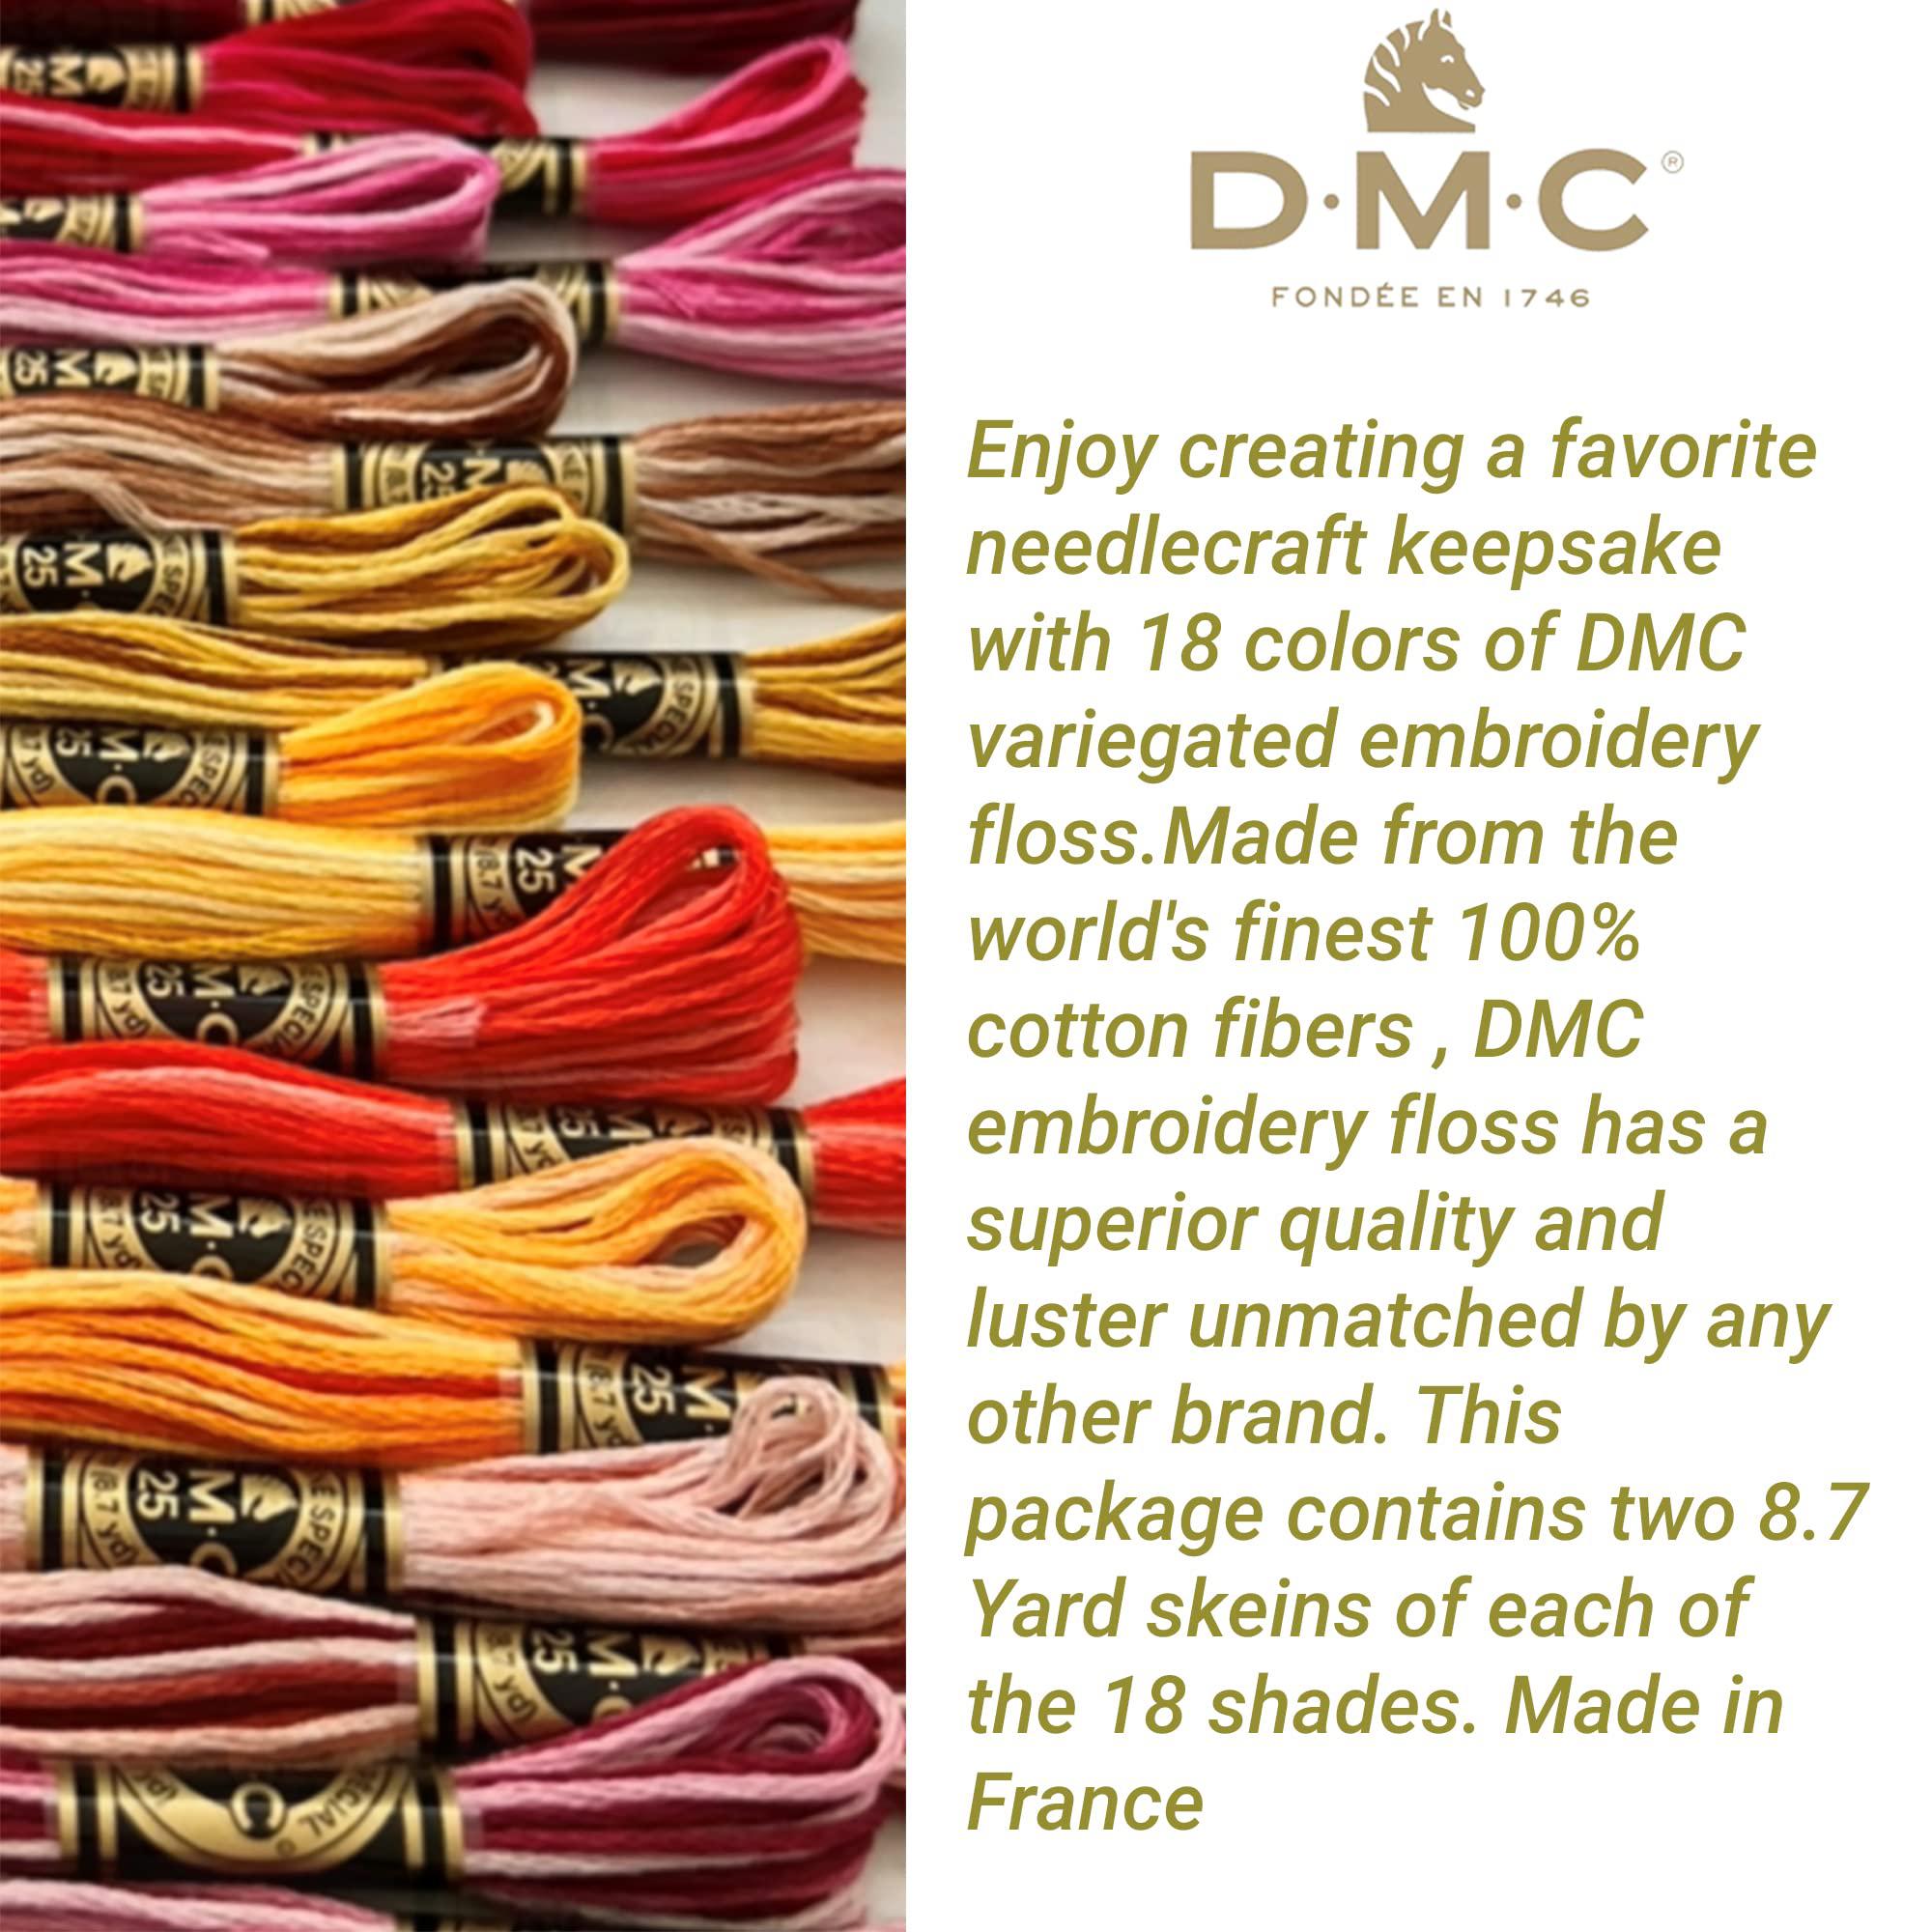 Charming Melodie dmc embroidery floss ,variegated embroidery thread,36 multicolor cross stitch threads bundle with bobbin winder,dmc color var